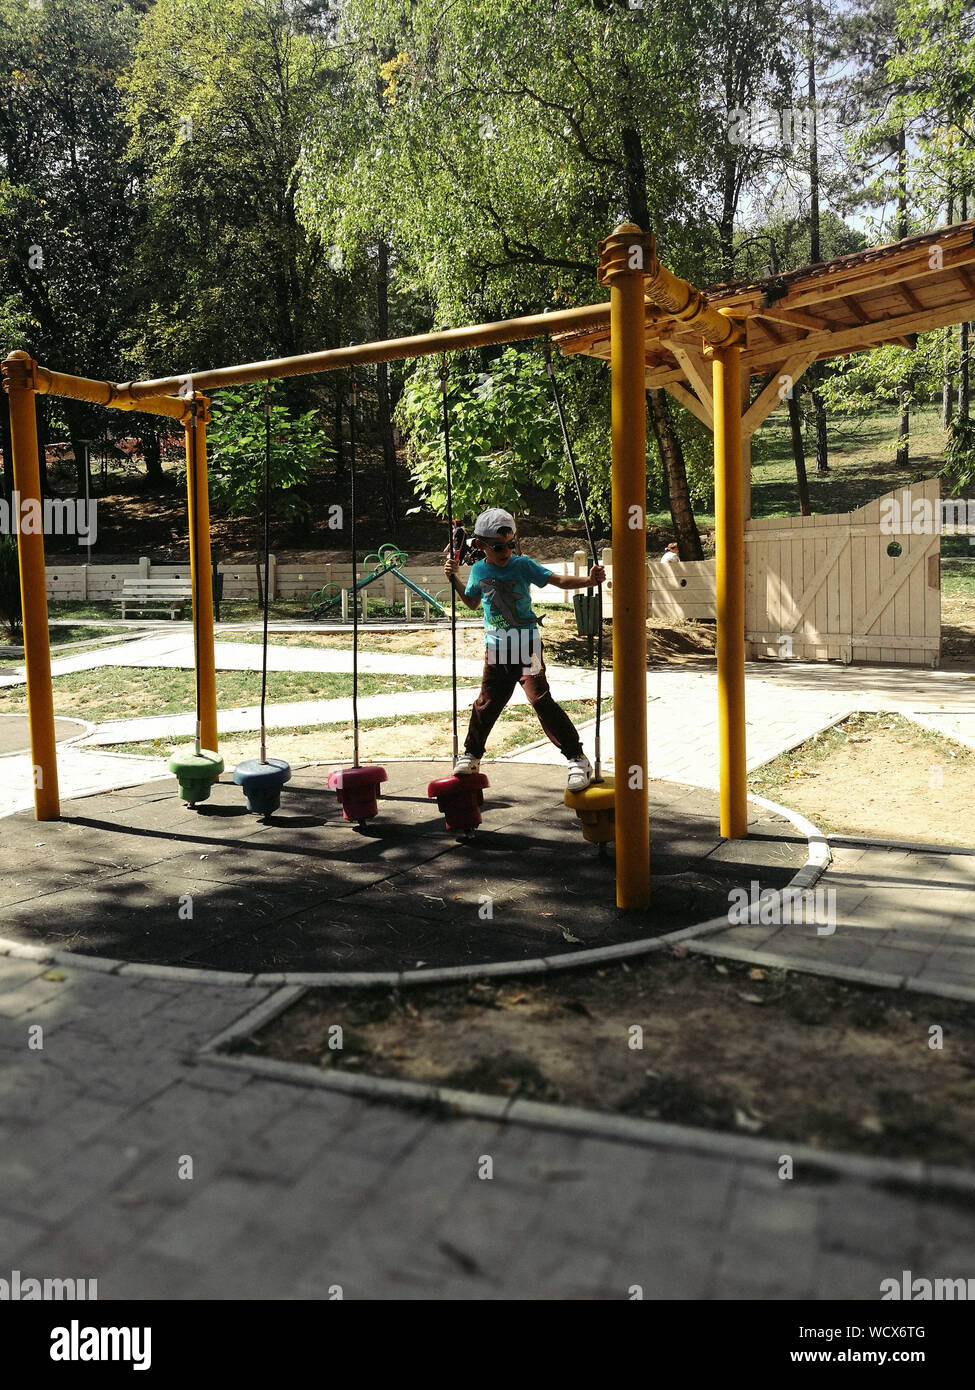 Boy Playing With Outdoor Play Equipment At Playground Stock Photo